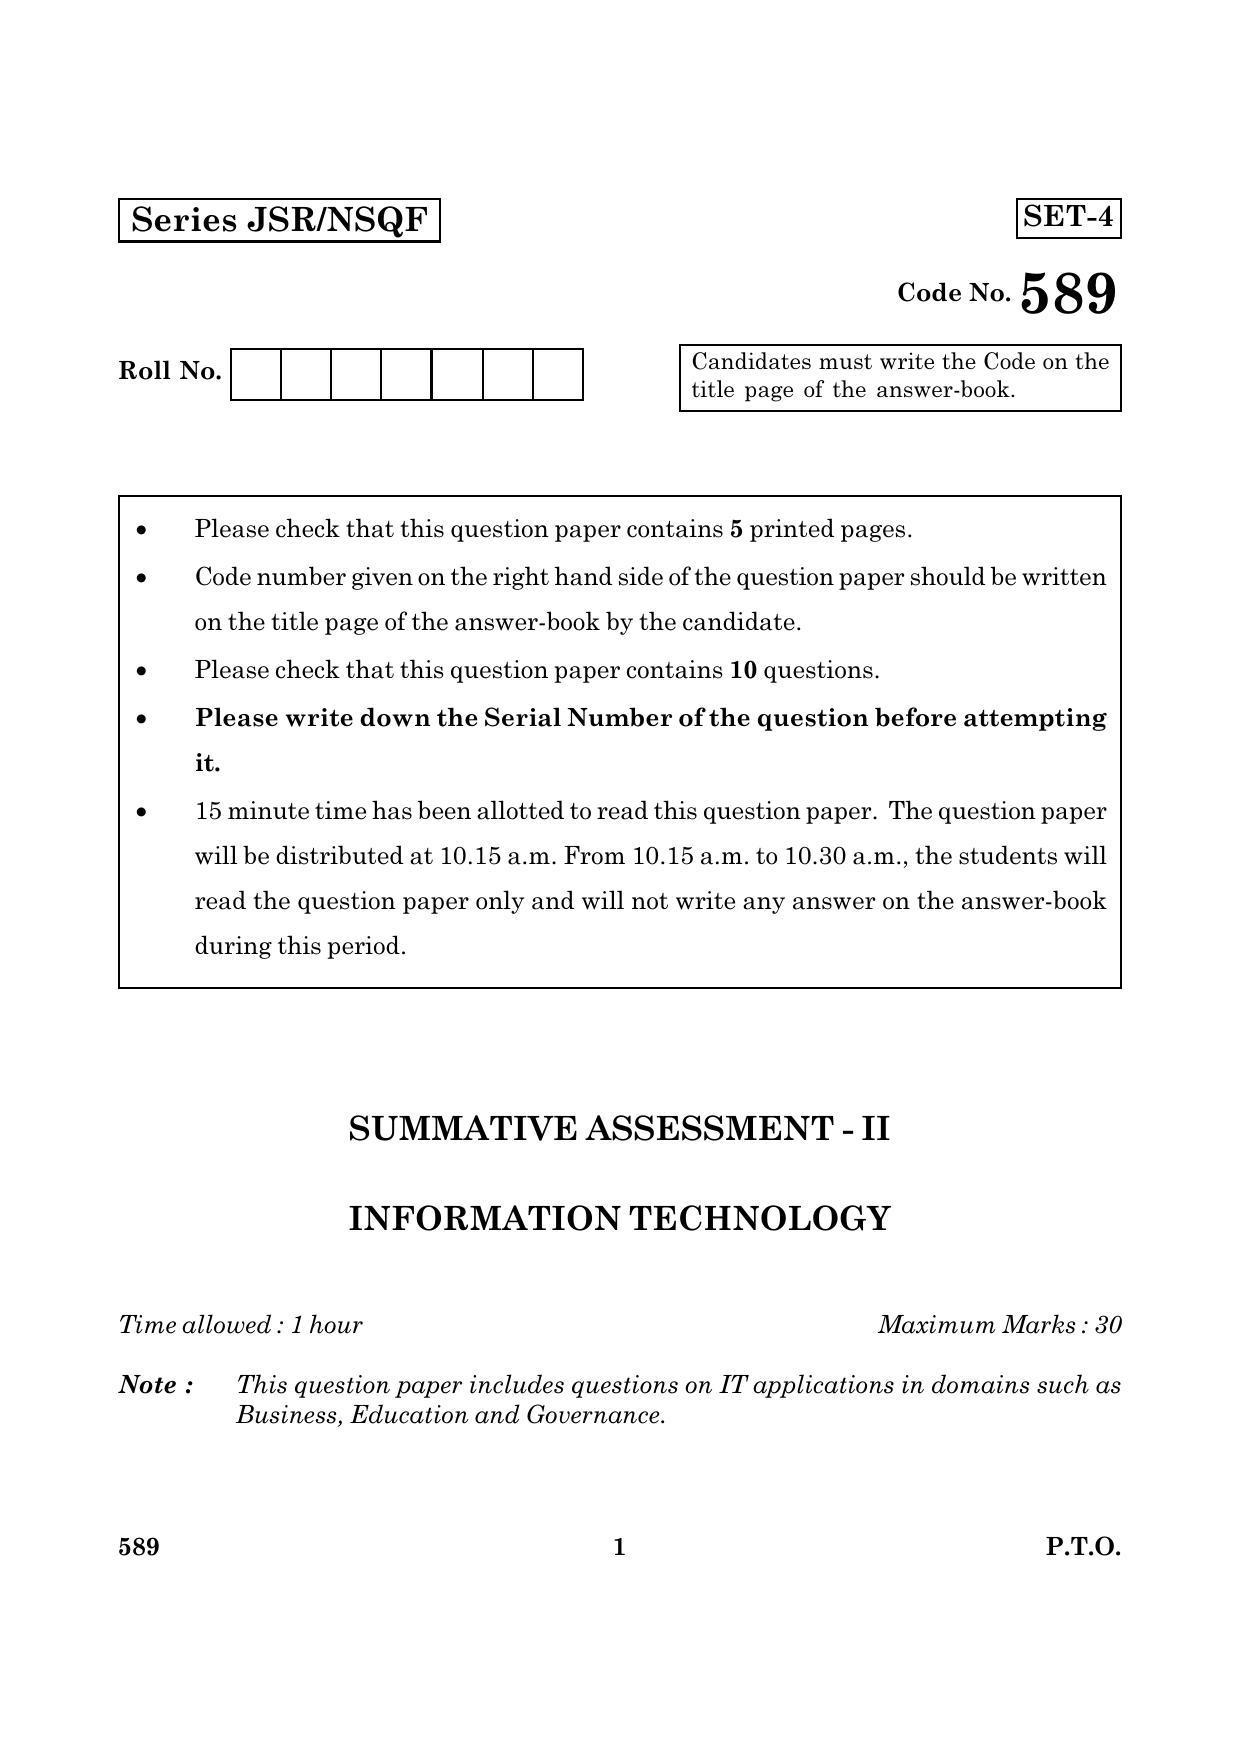 CBSE Class 10 NSQF 589 Information Technology 2016 Question Paper - Page 1